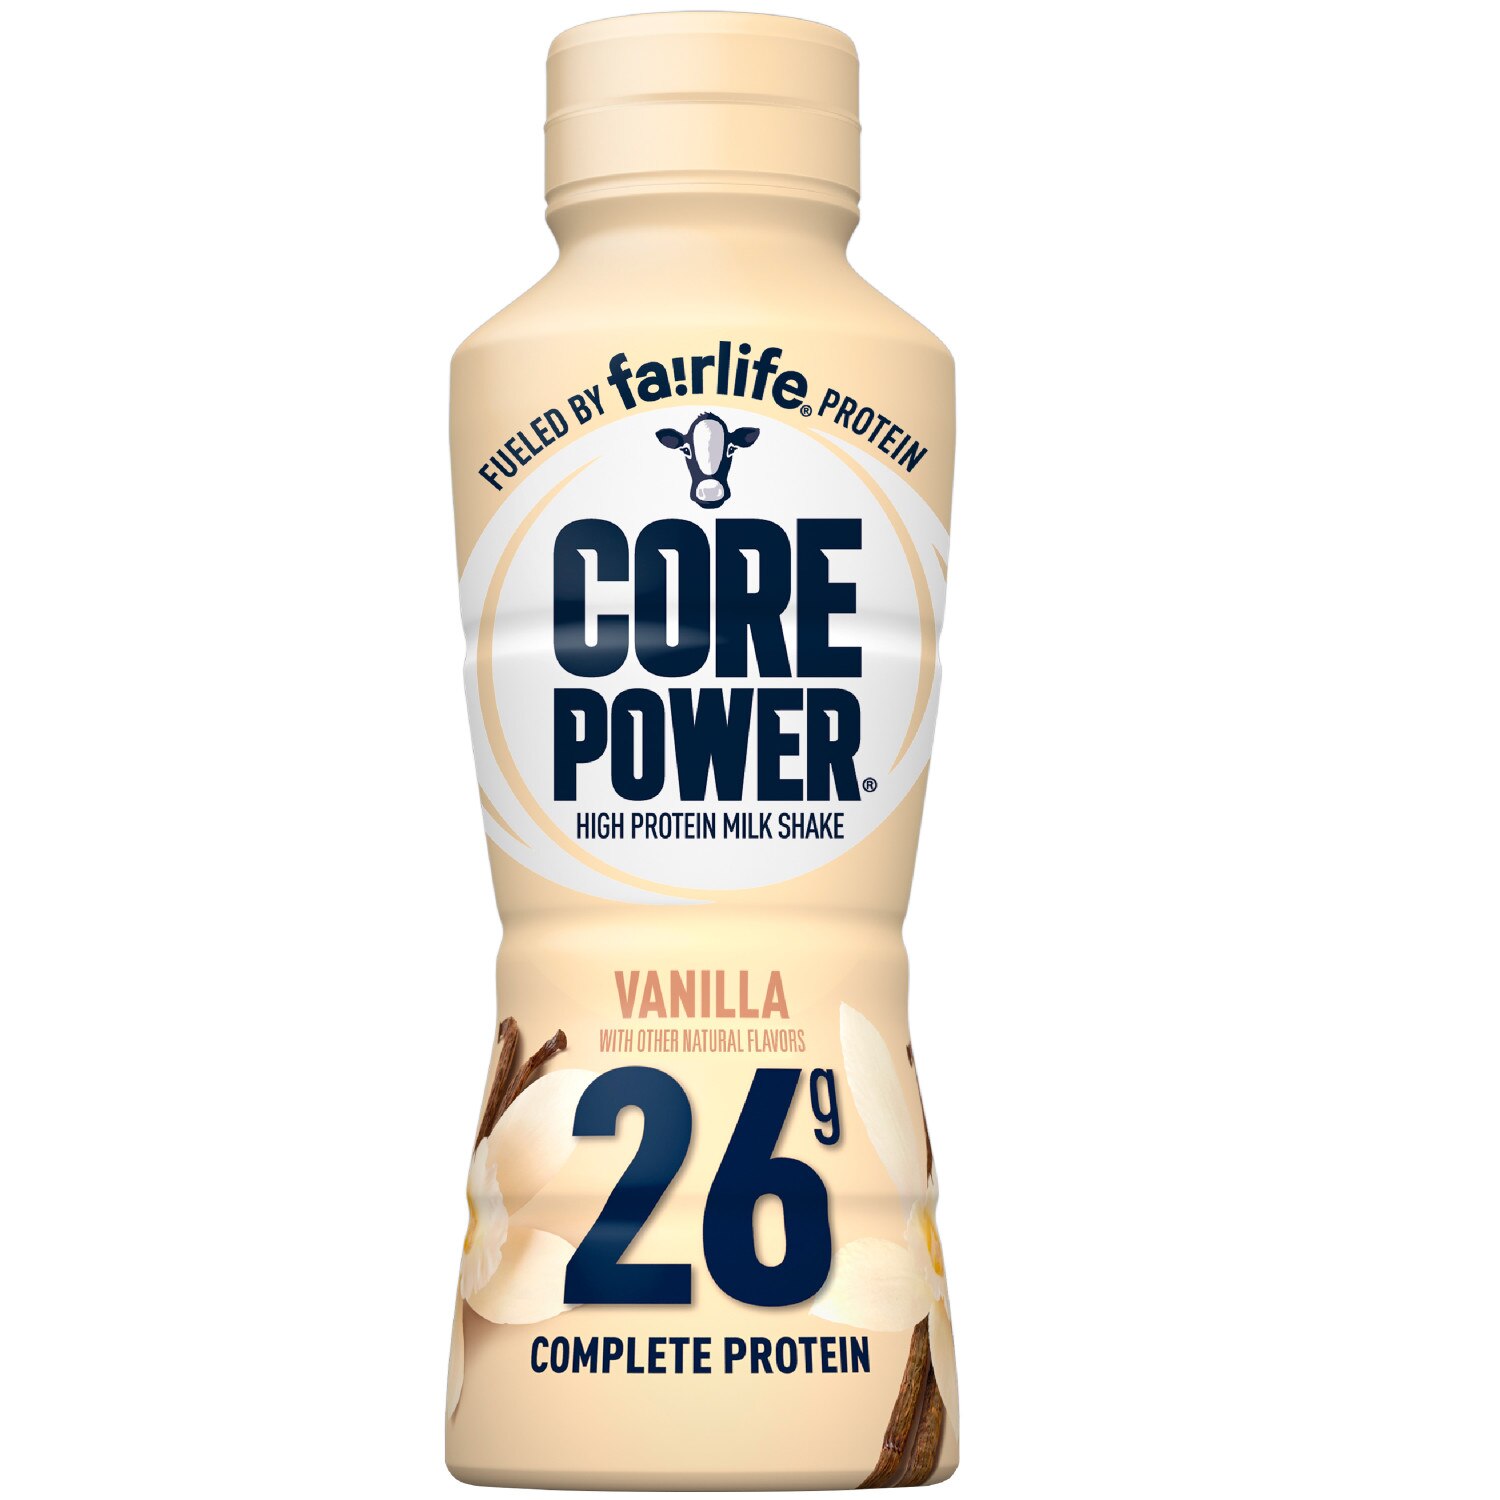 Core Power Complete Protein by Fairlife, 26G Vanilla Protein Shake, 14 fl oz